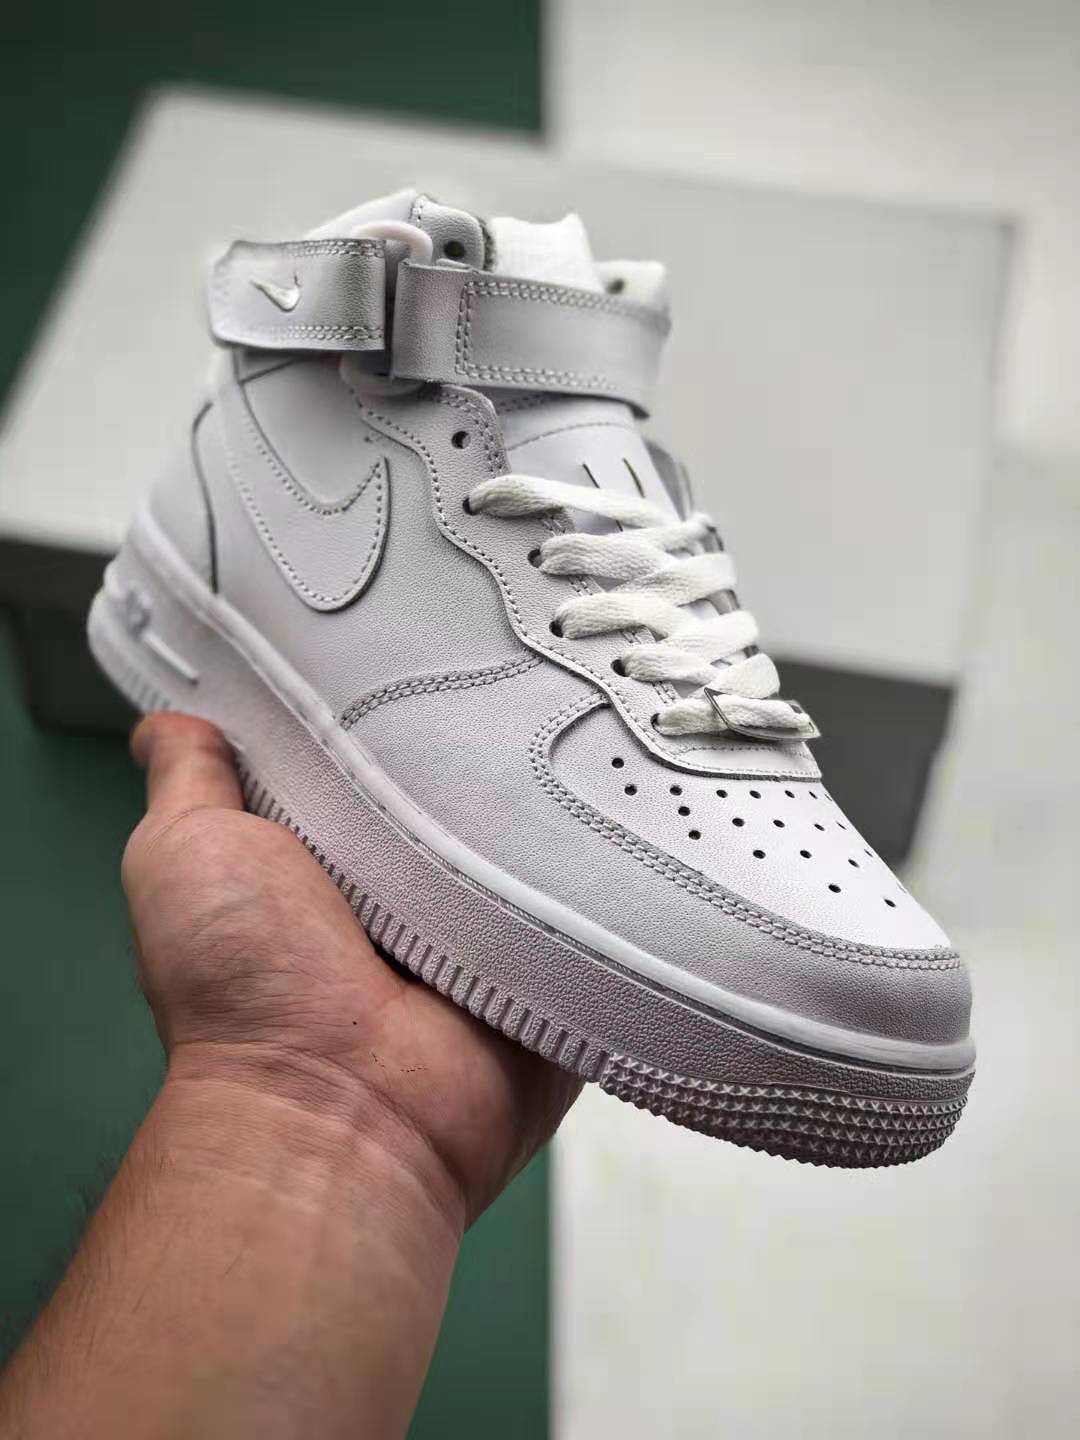 Nike Air Force 1 Mid 07 Leather 'Triple White' 366731-100 - Classic Style and Supreme Comfort